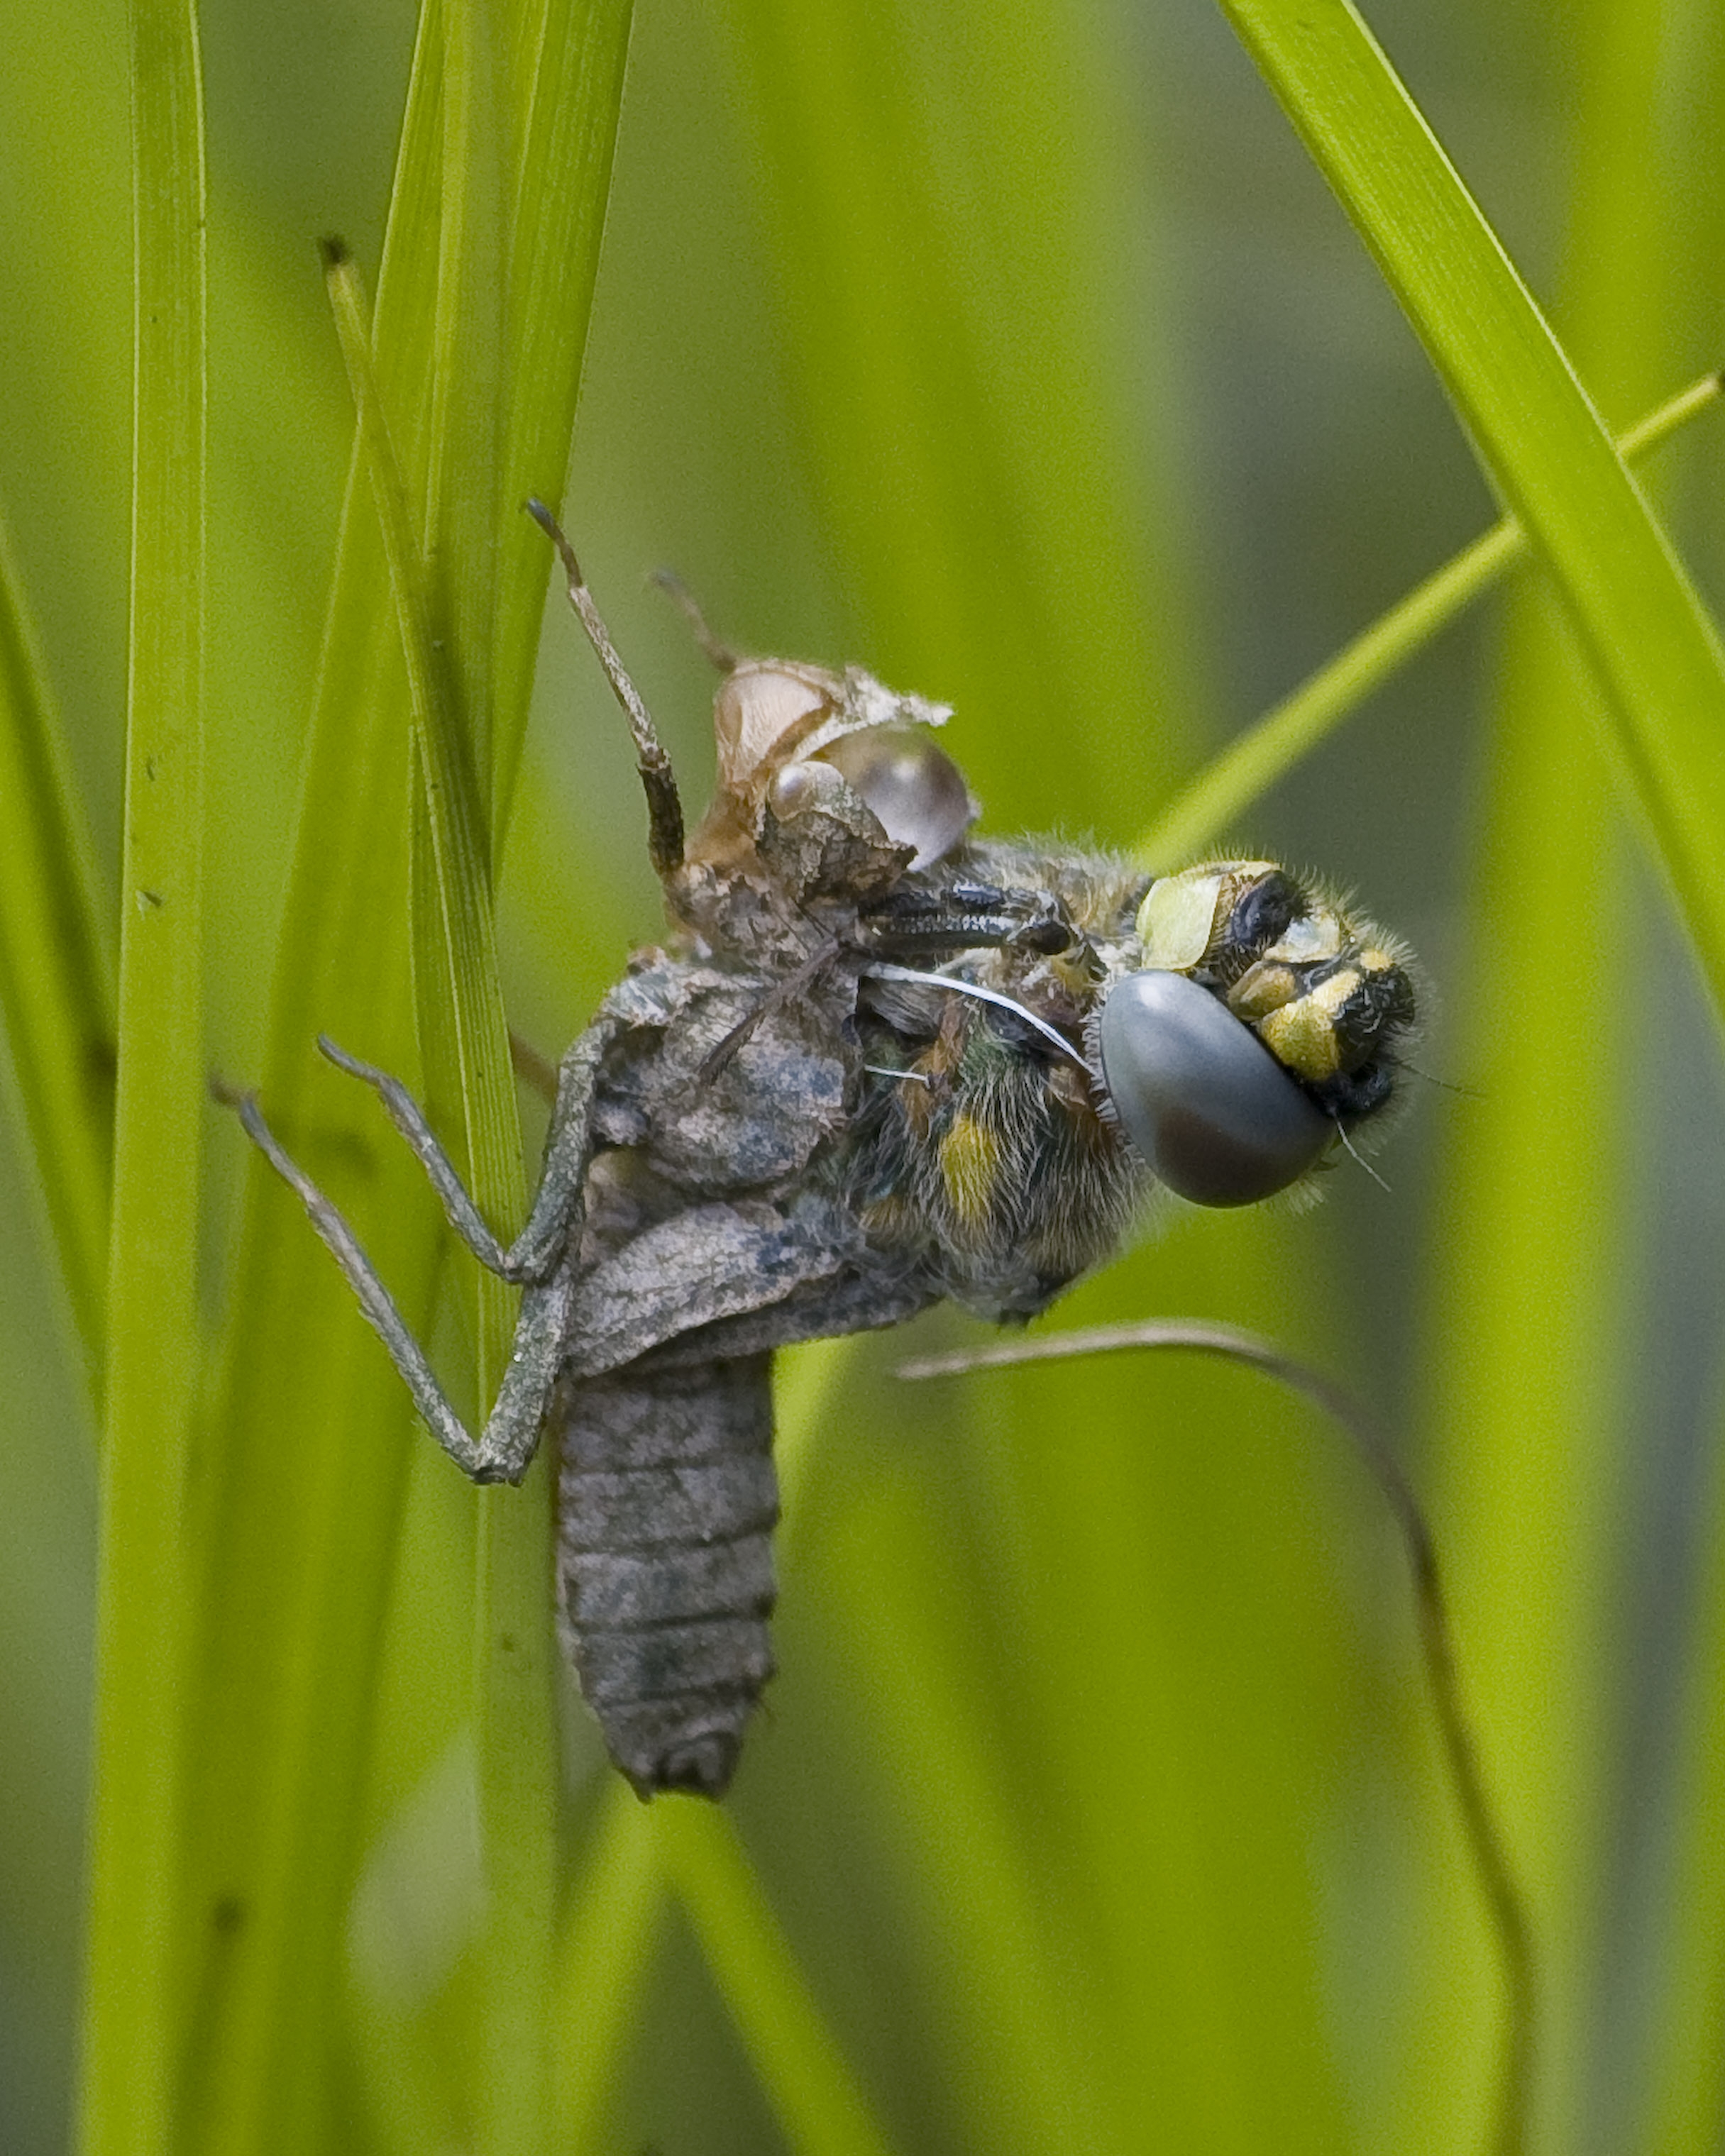 Adult dragonfly emerges from it's larval skin, which is attached to a reed.